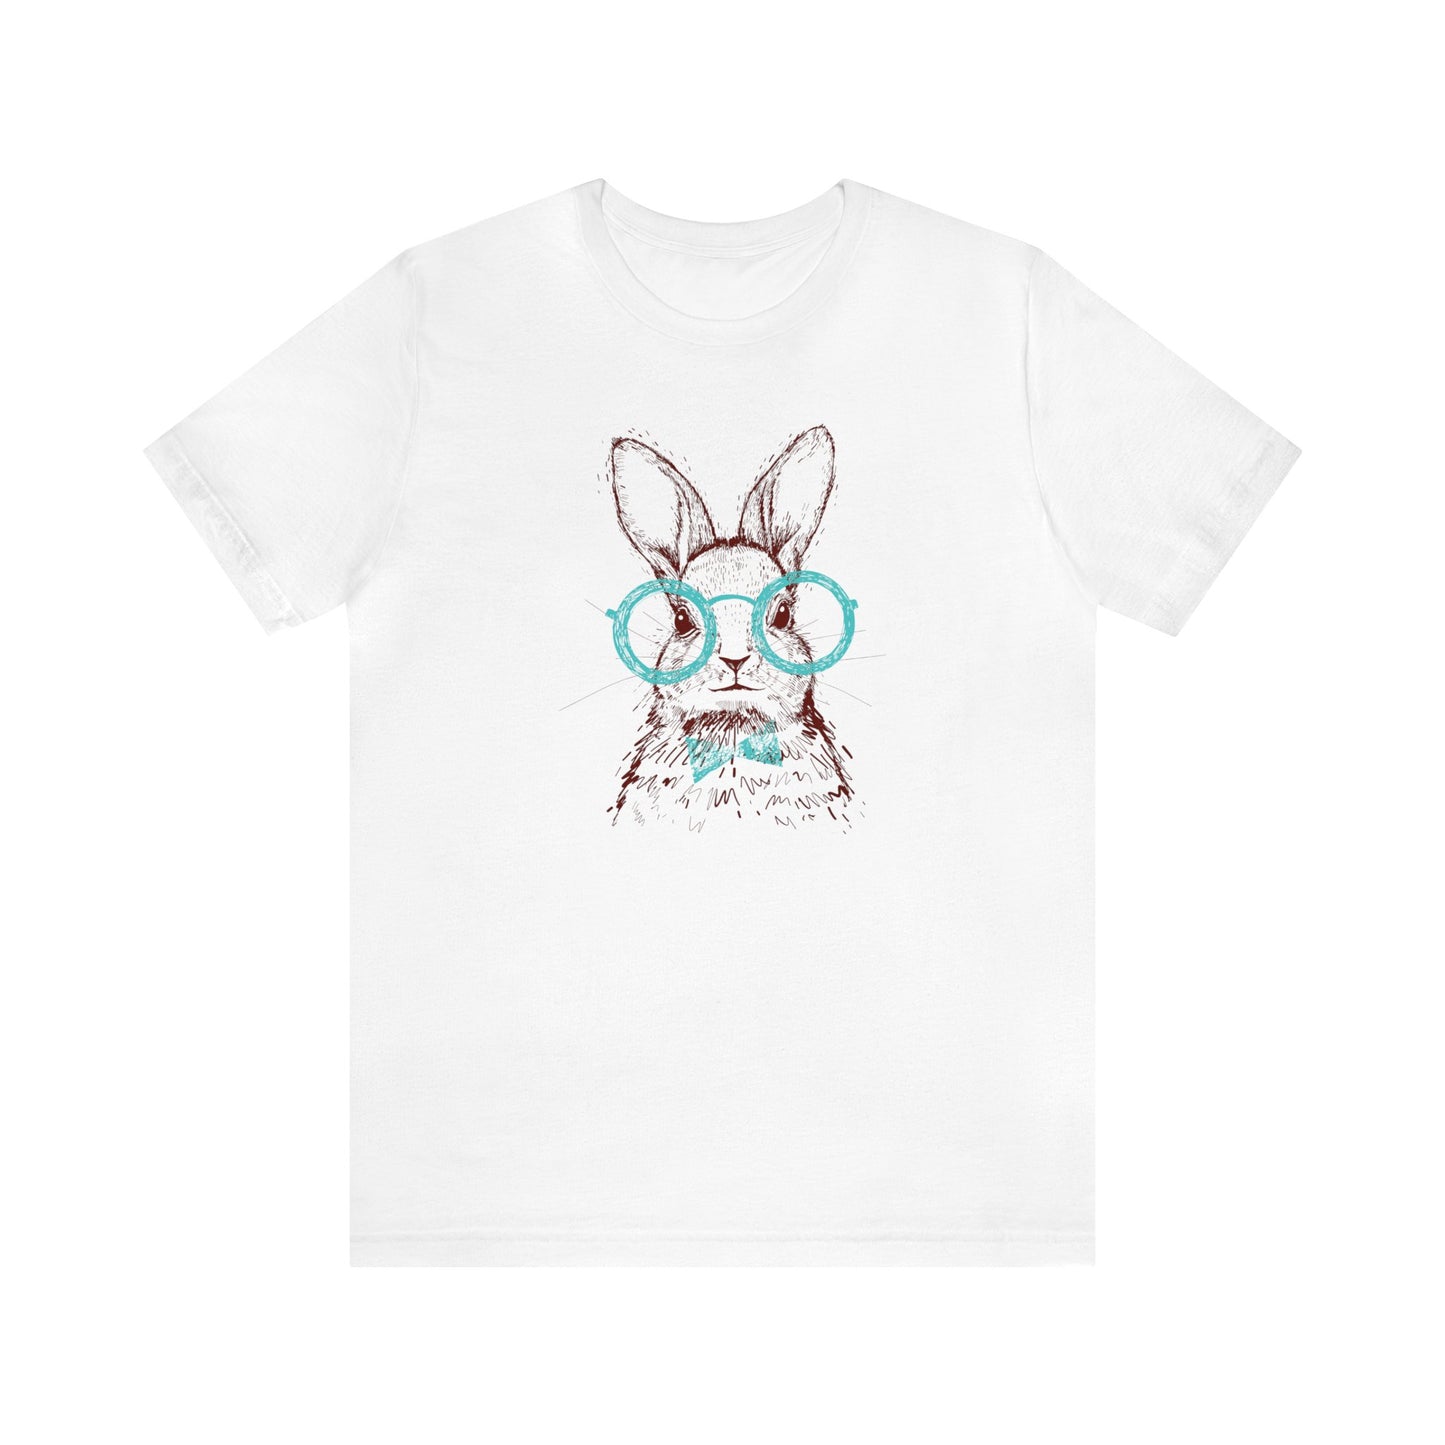 Hipster Bunny T-Shirt For Easter T Shirt For Cute Rabbit T Shirt